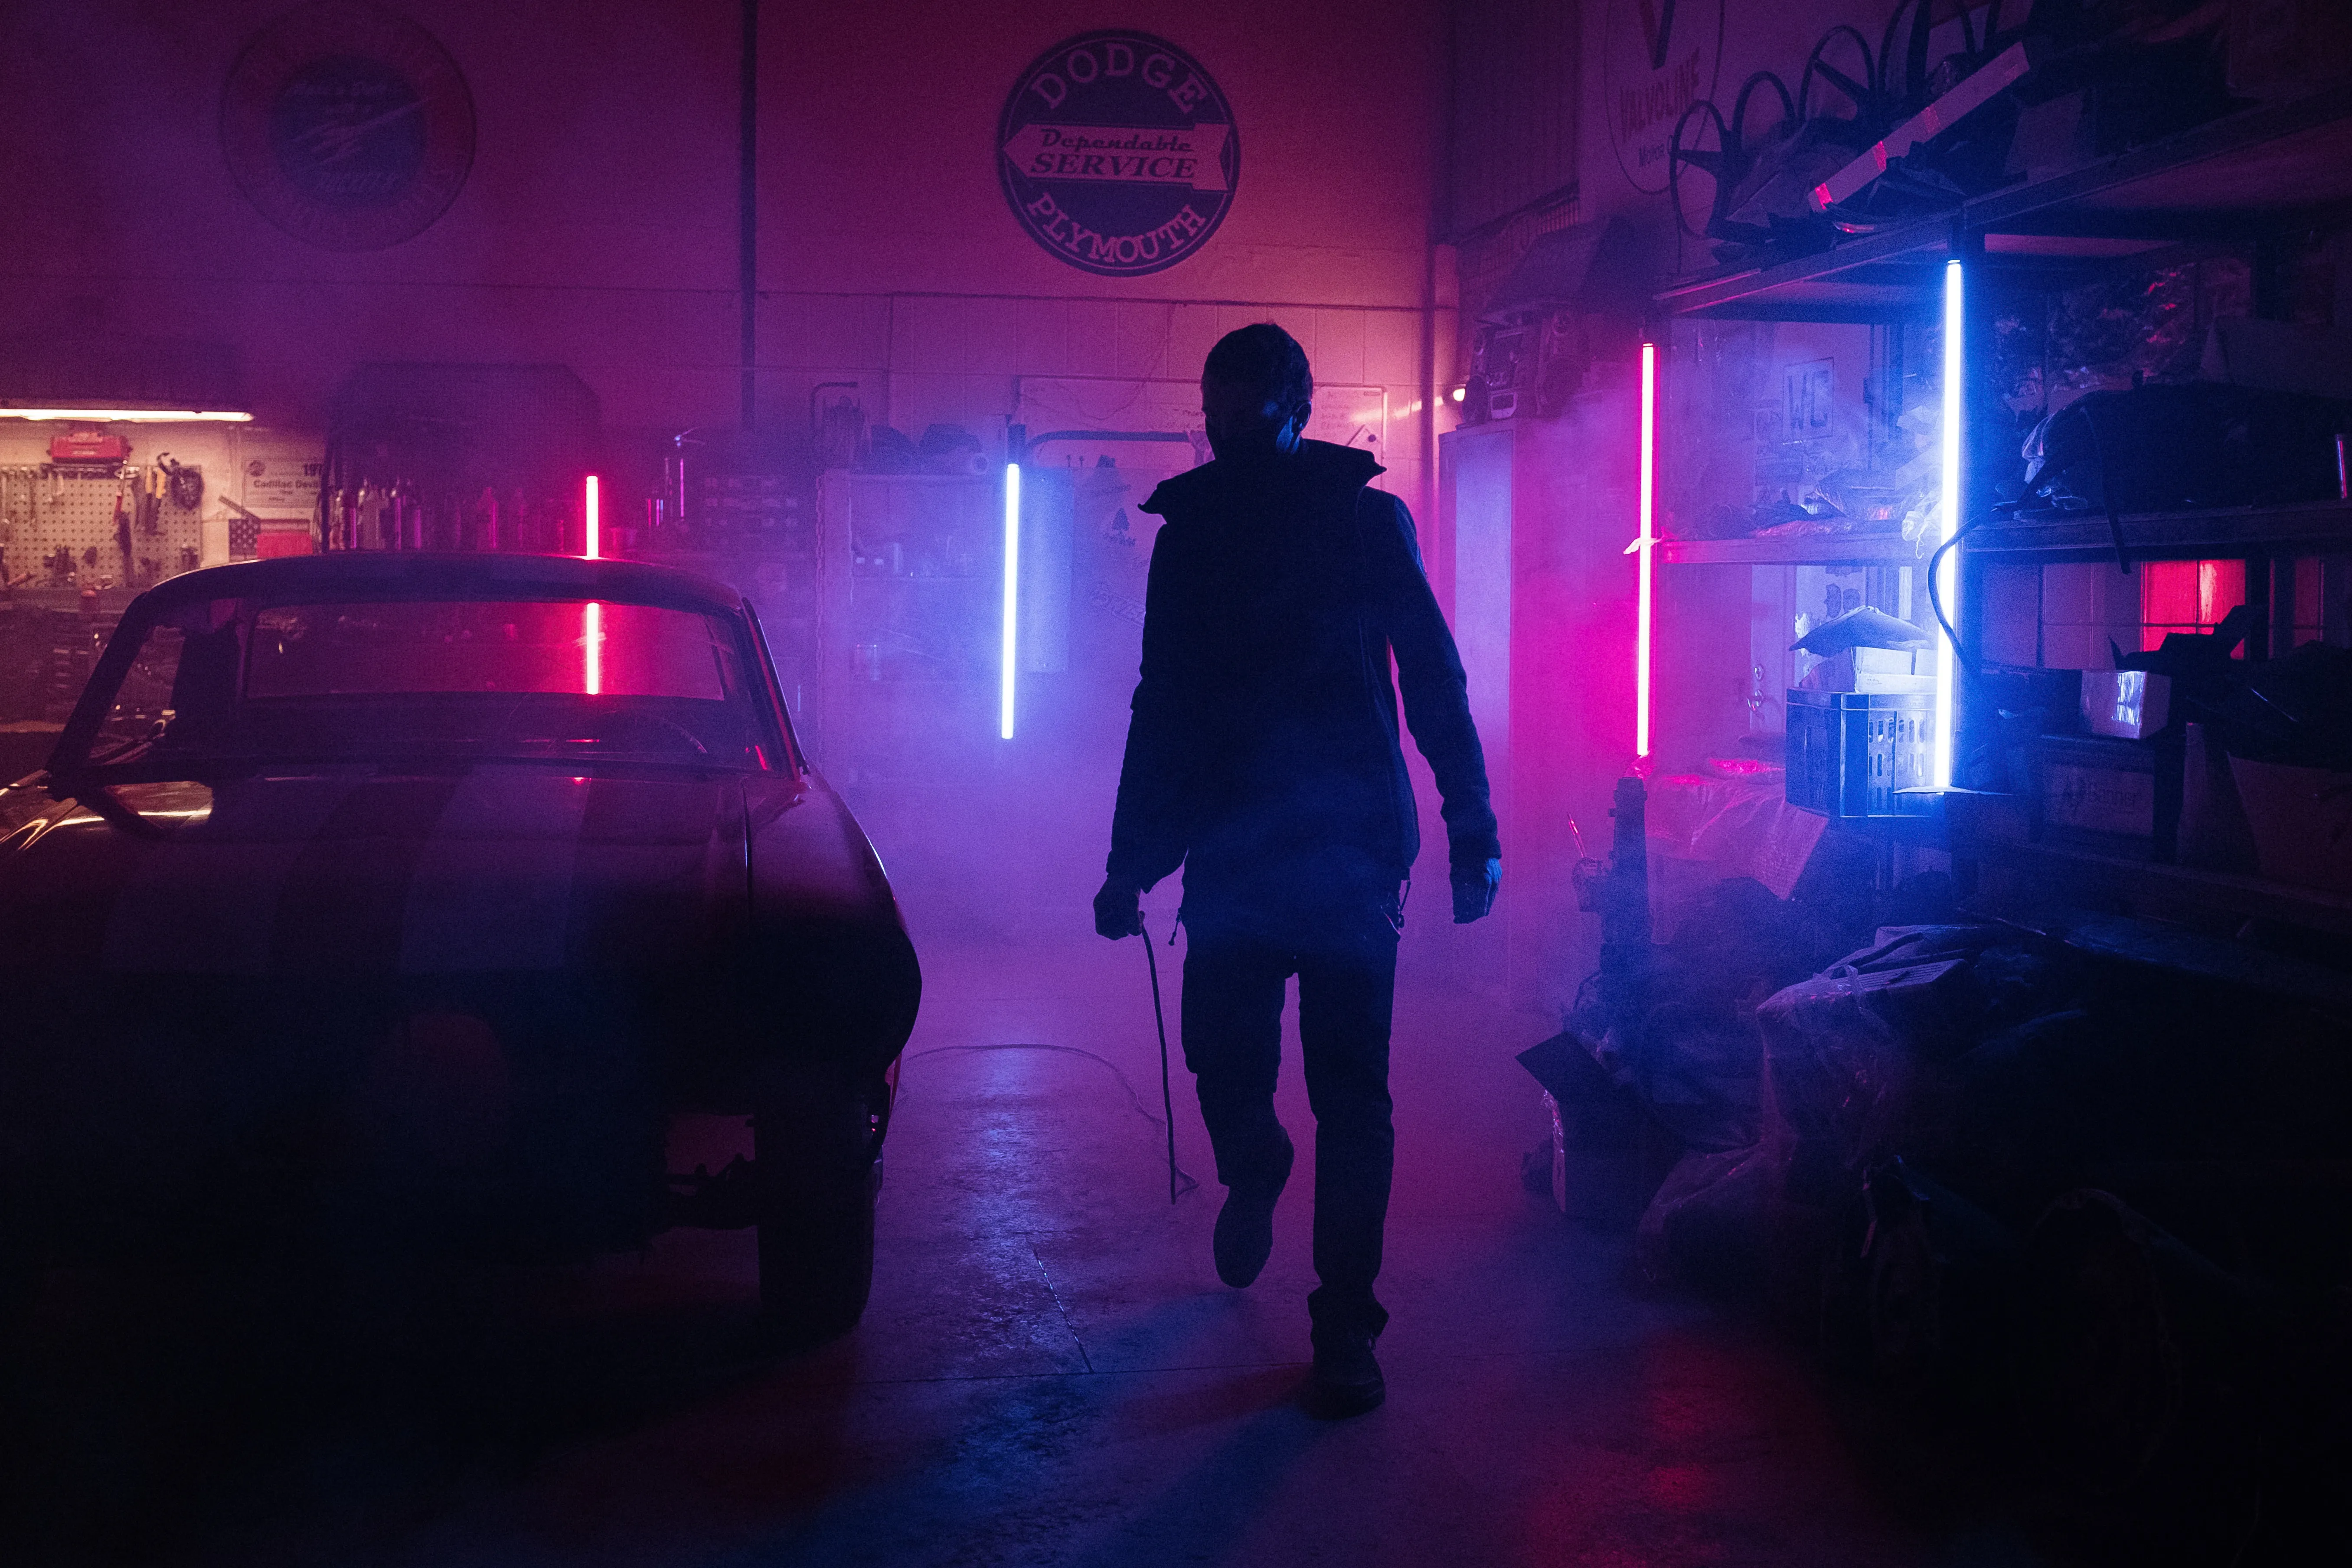 A man standing in pink purple lights with a car